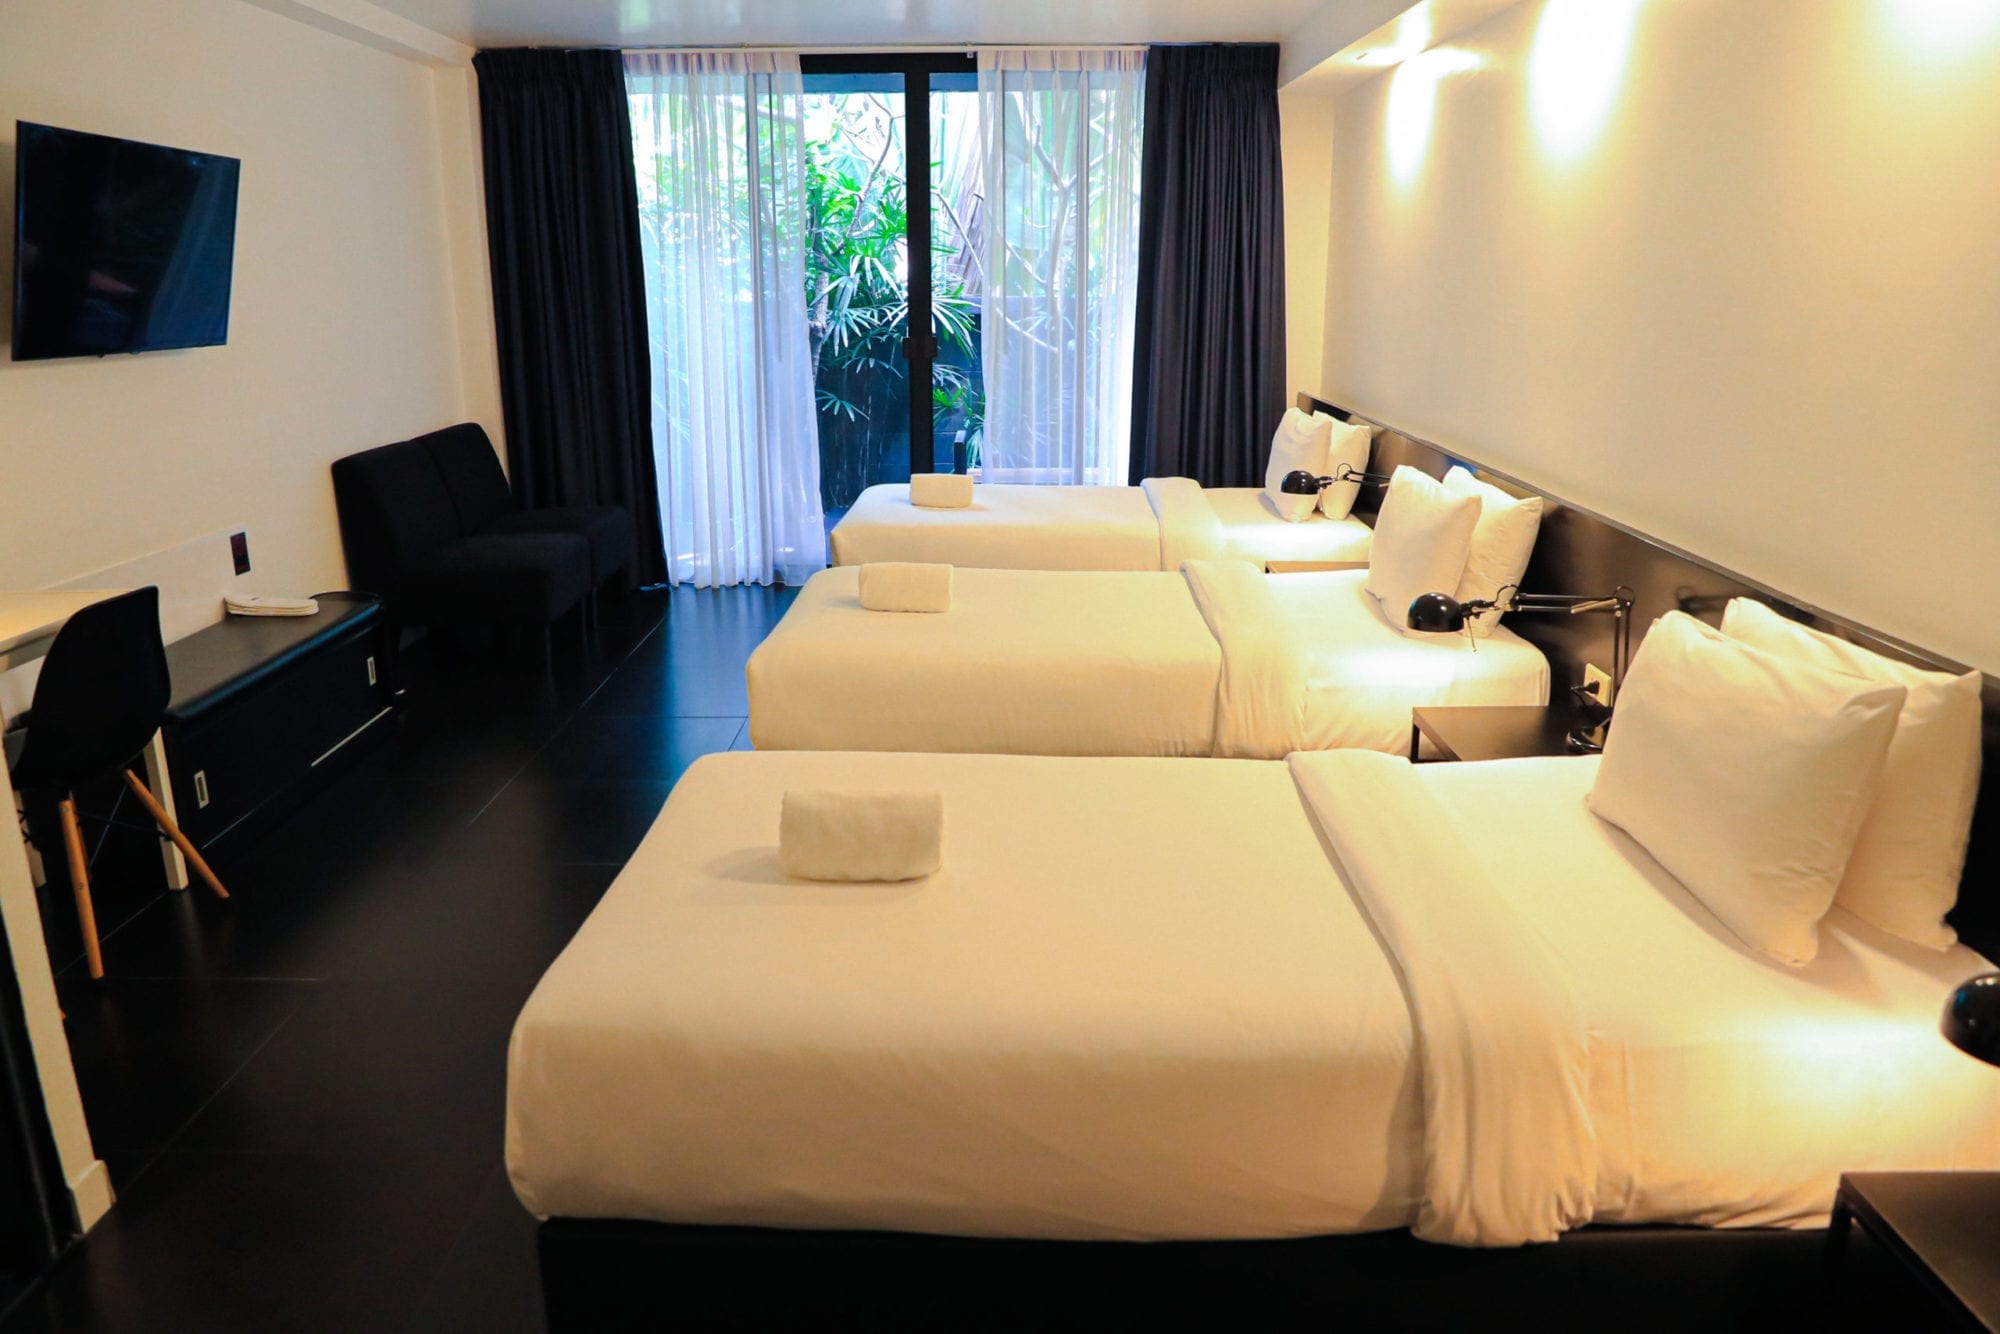 Triple room with three single beds